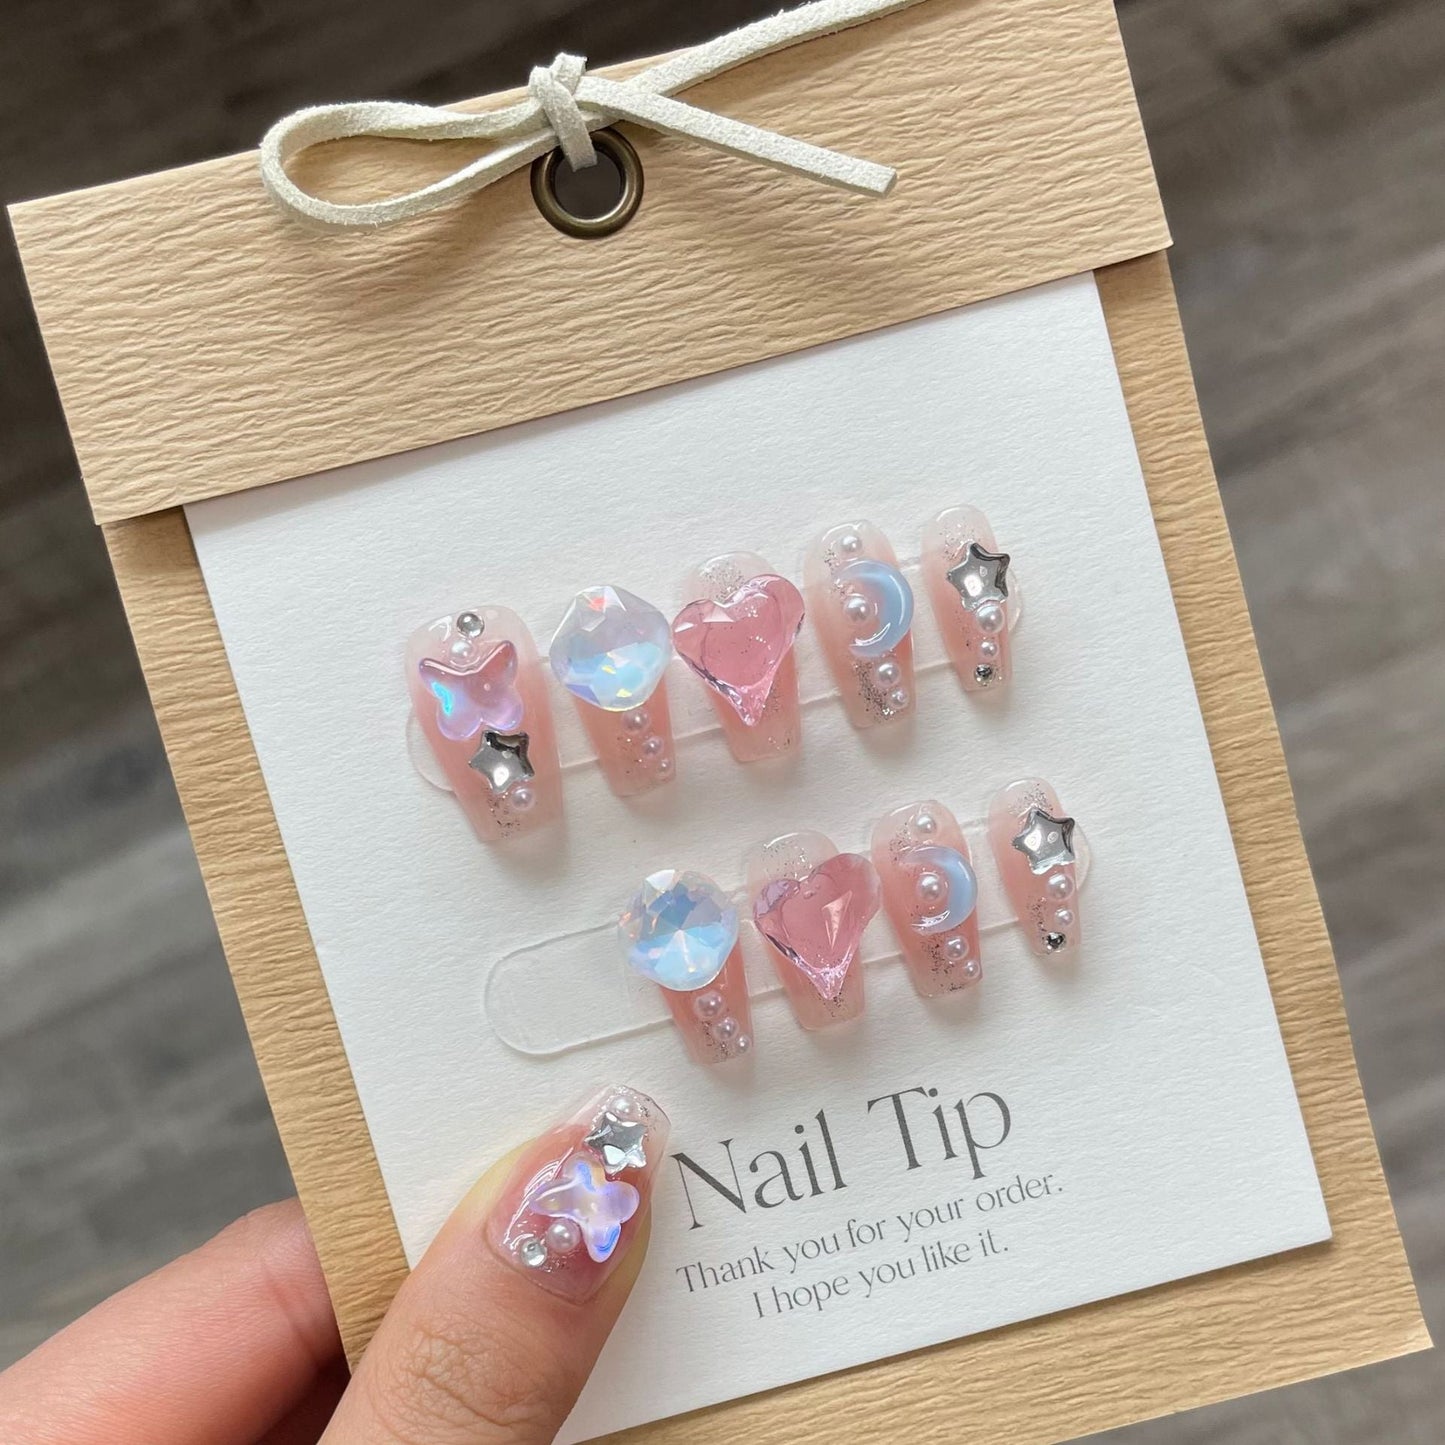 788/790 Moon and stars style press on nails 100% handmade false nails nude color pink